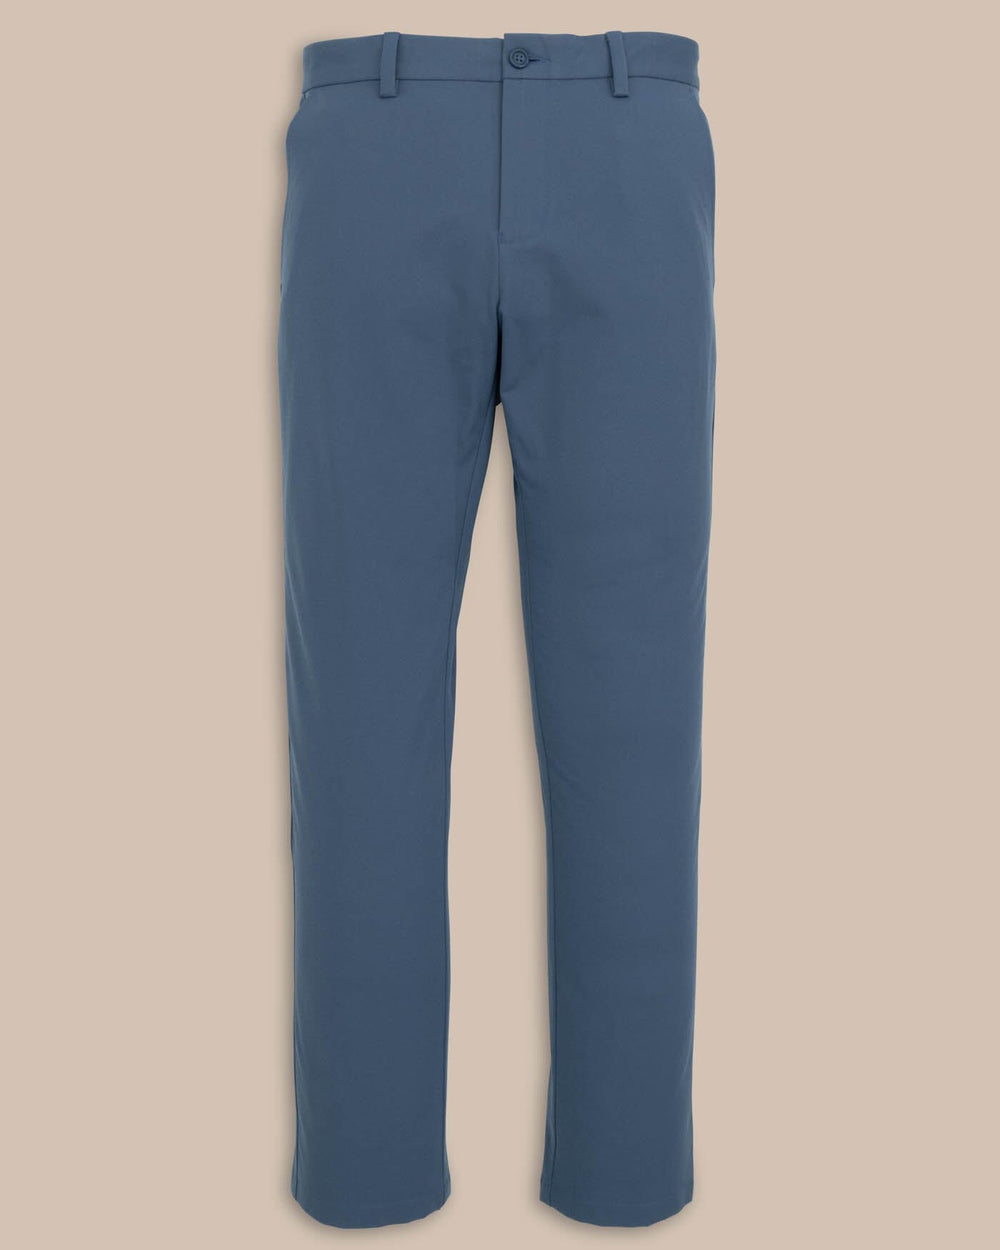 The front view of the Southern Tide Jack Performance Pant Dark Seas by Southern Tide - Dark Seas